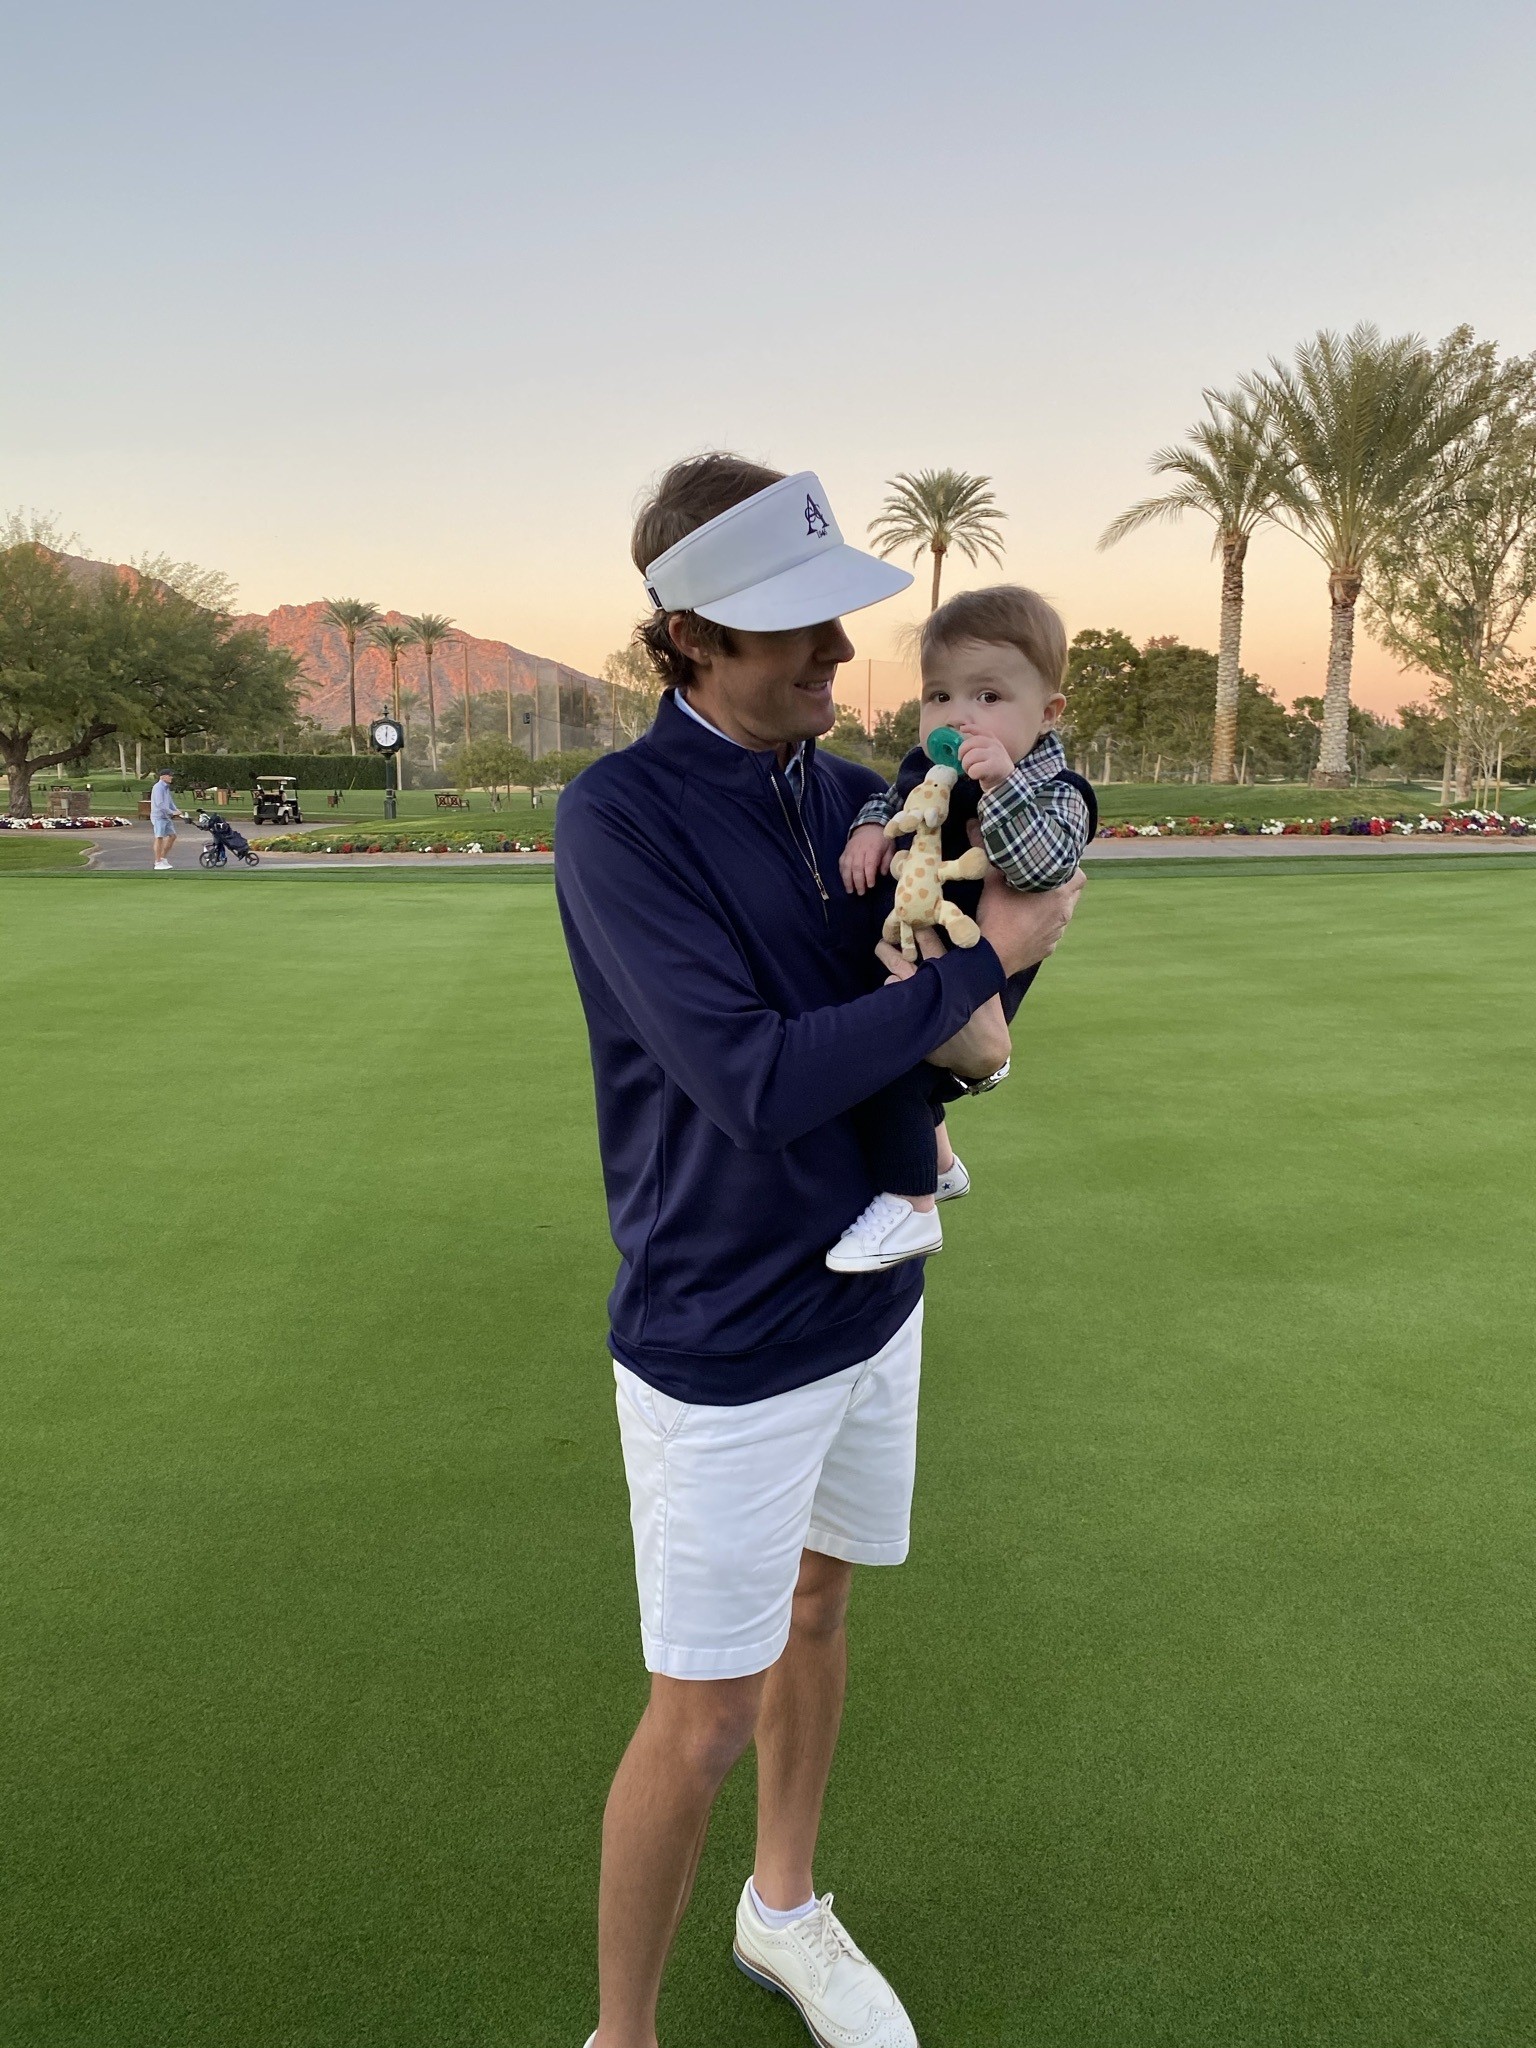 Mike with his son on a golf course